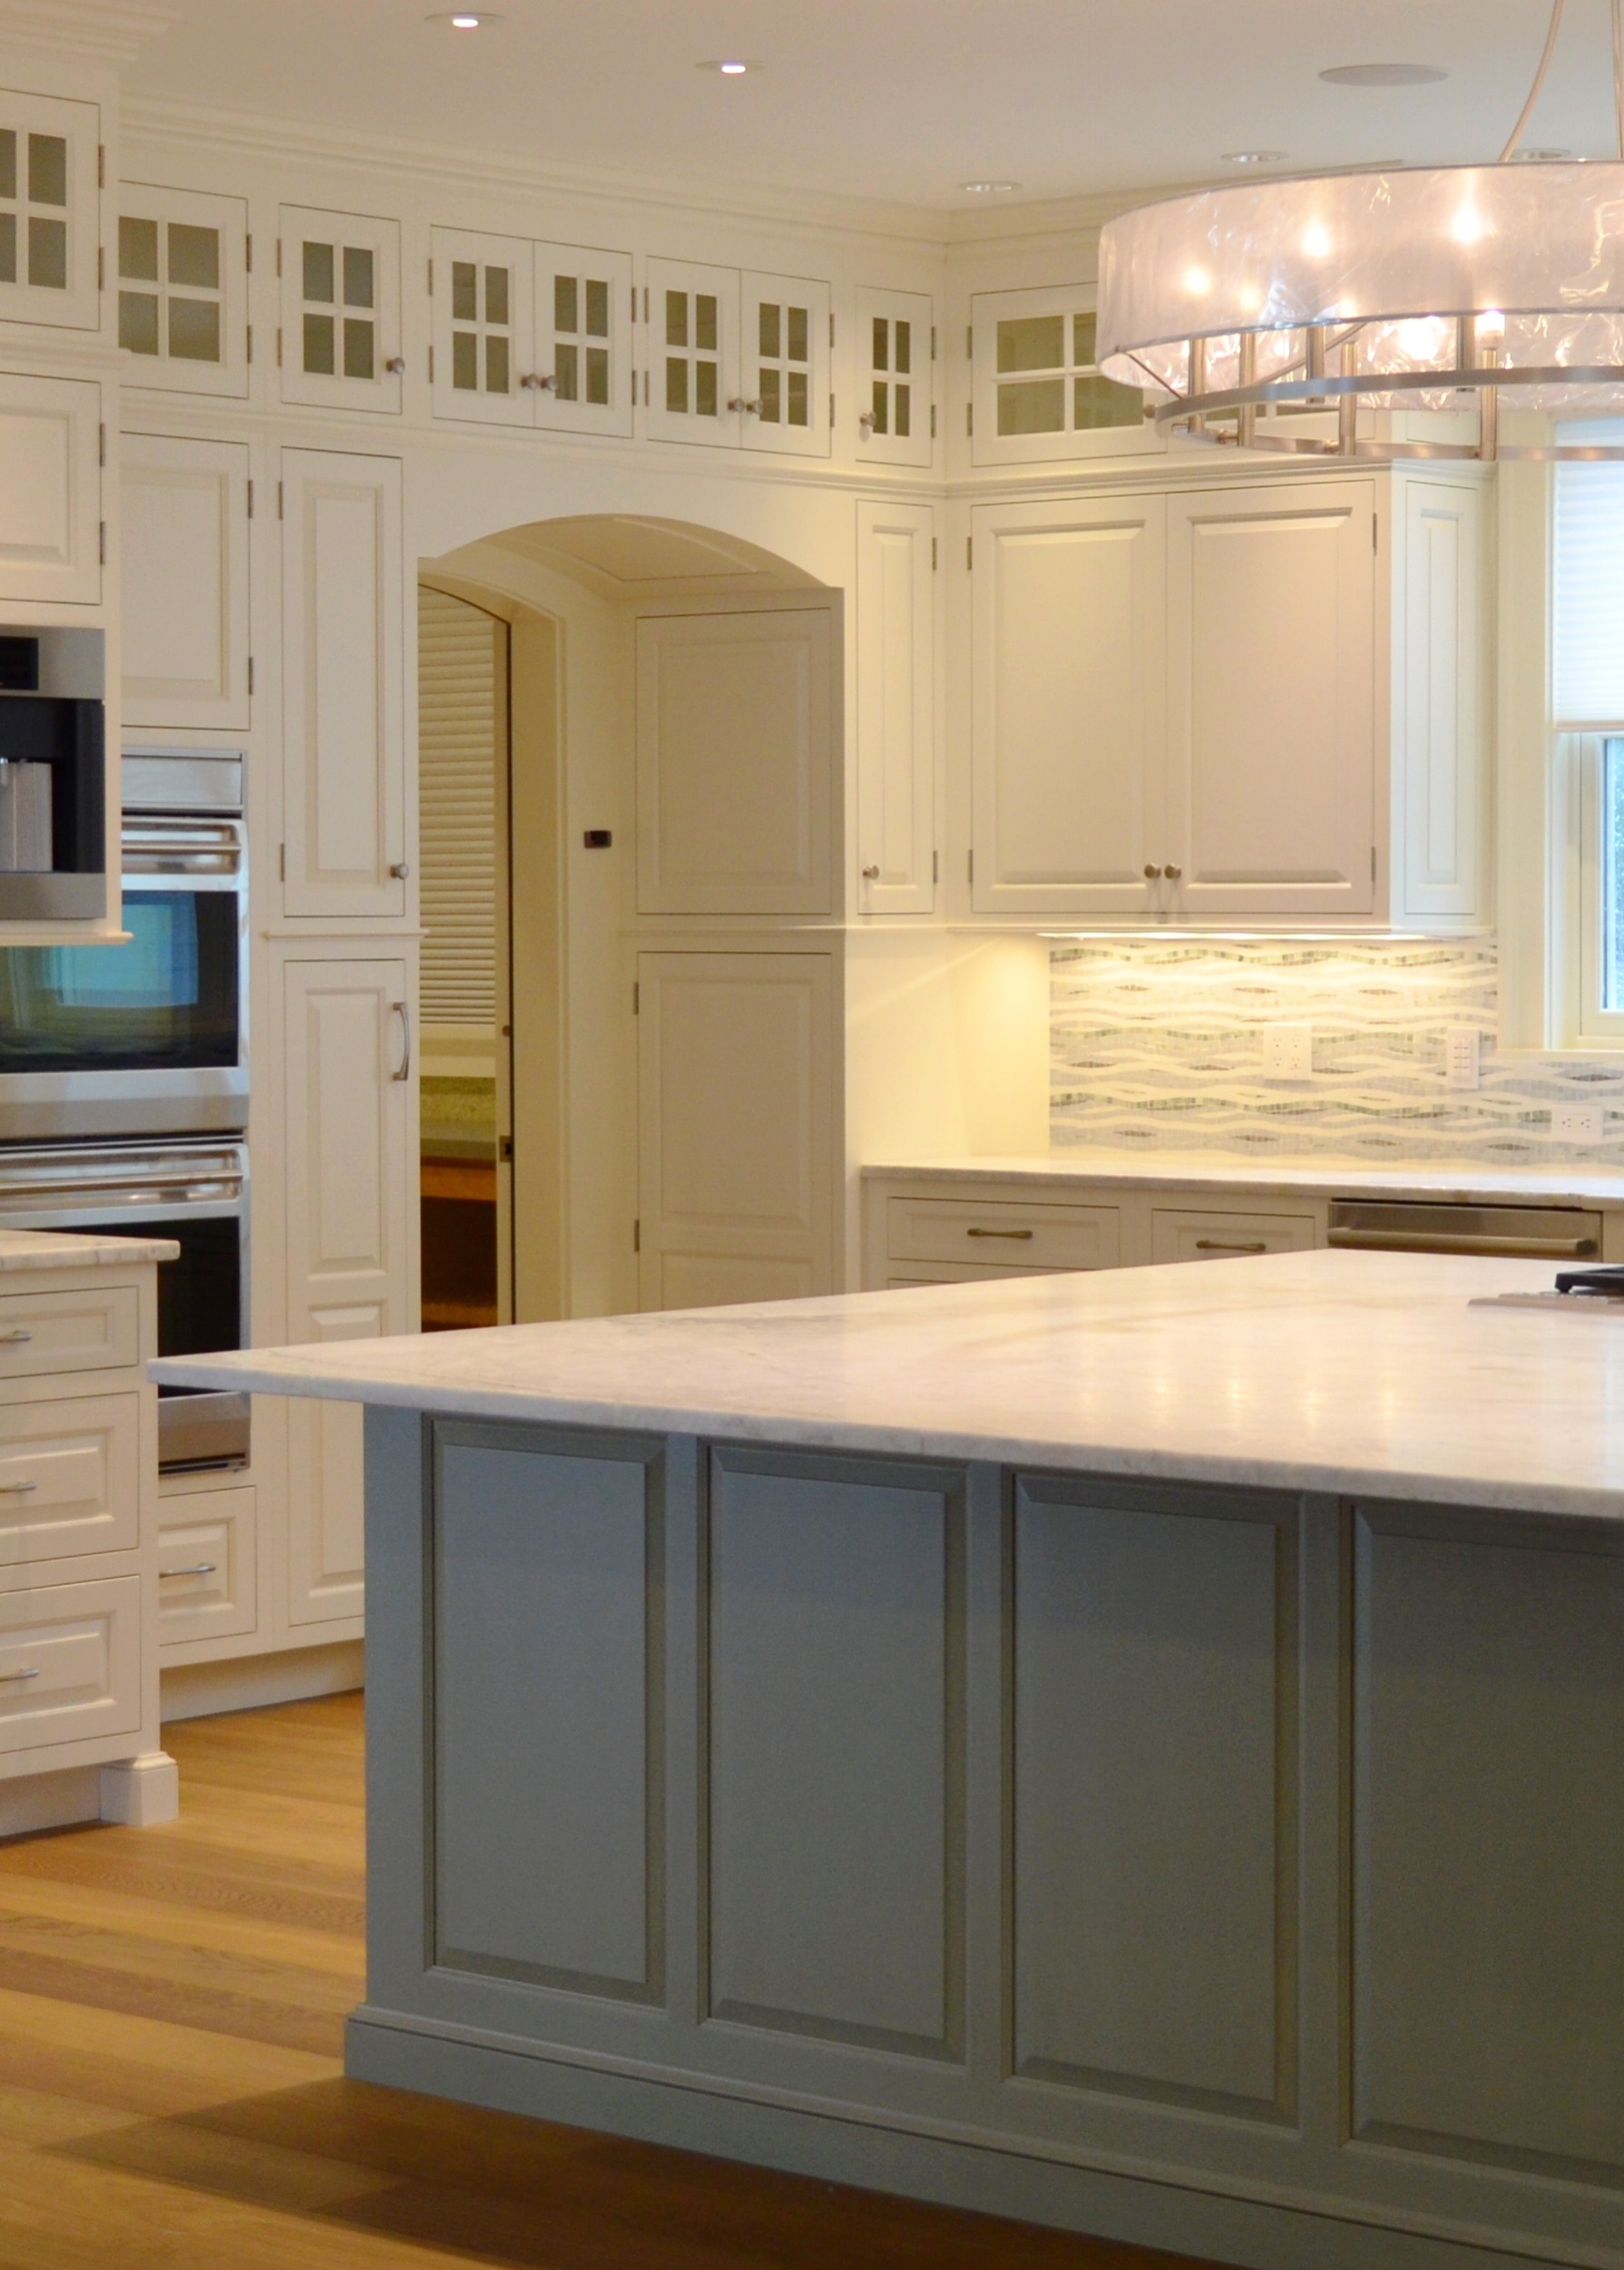 custom signature cabinetry used in this kitchen by general woodcraft